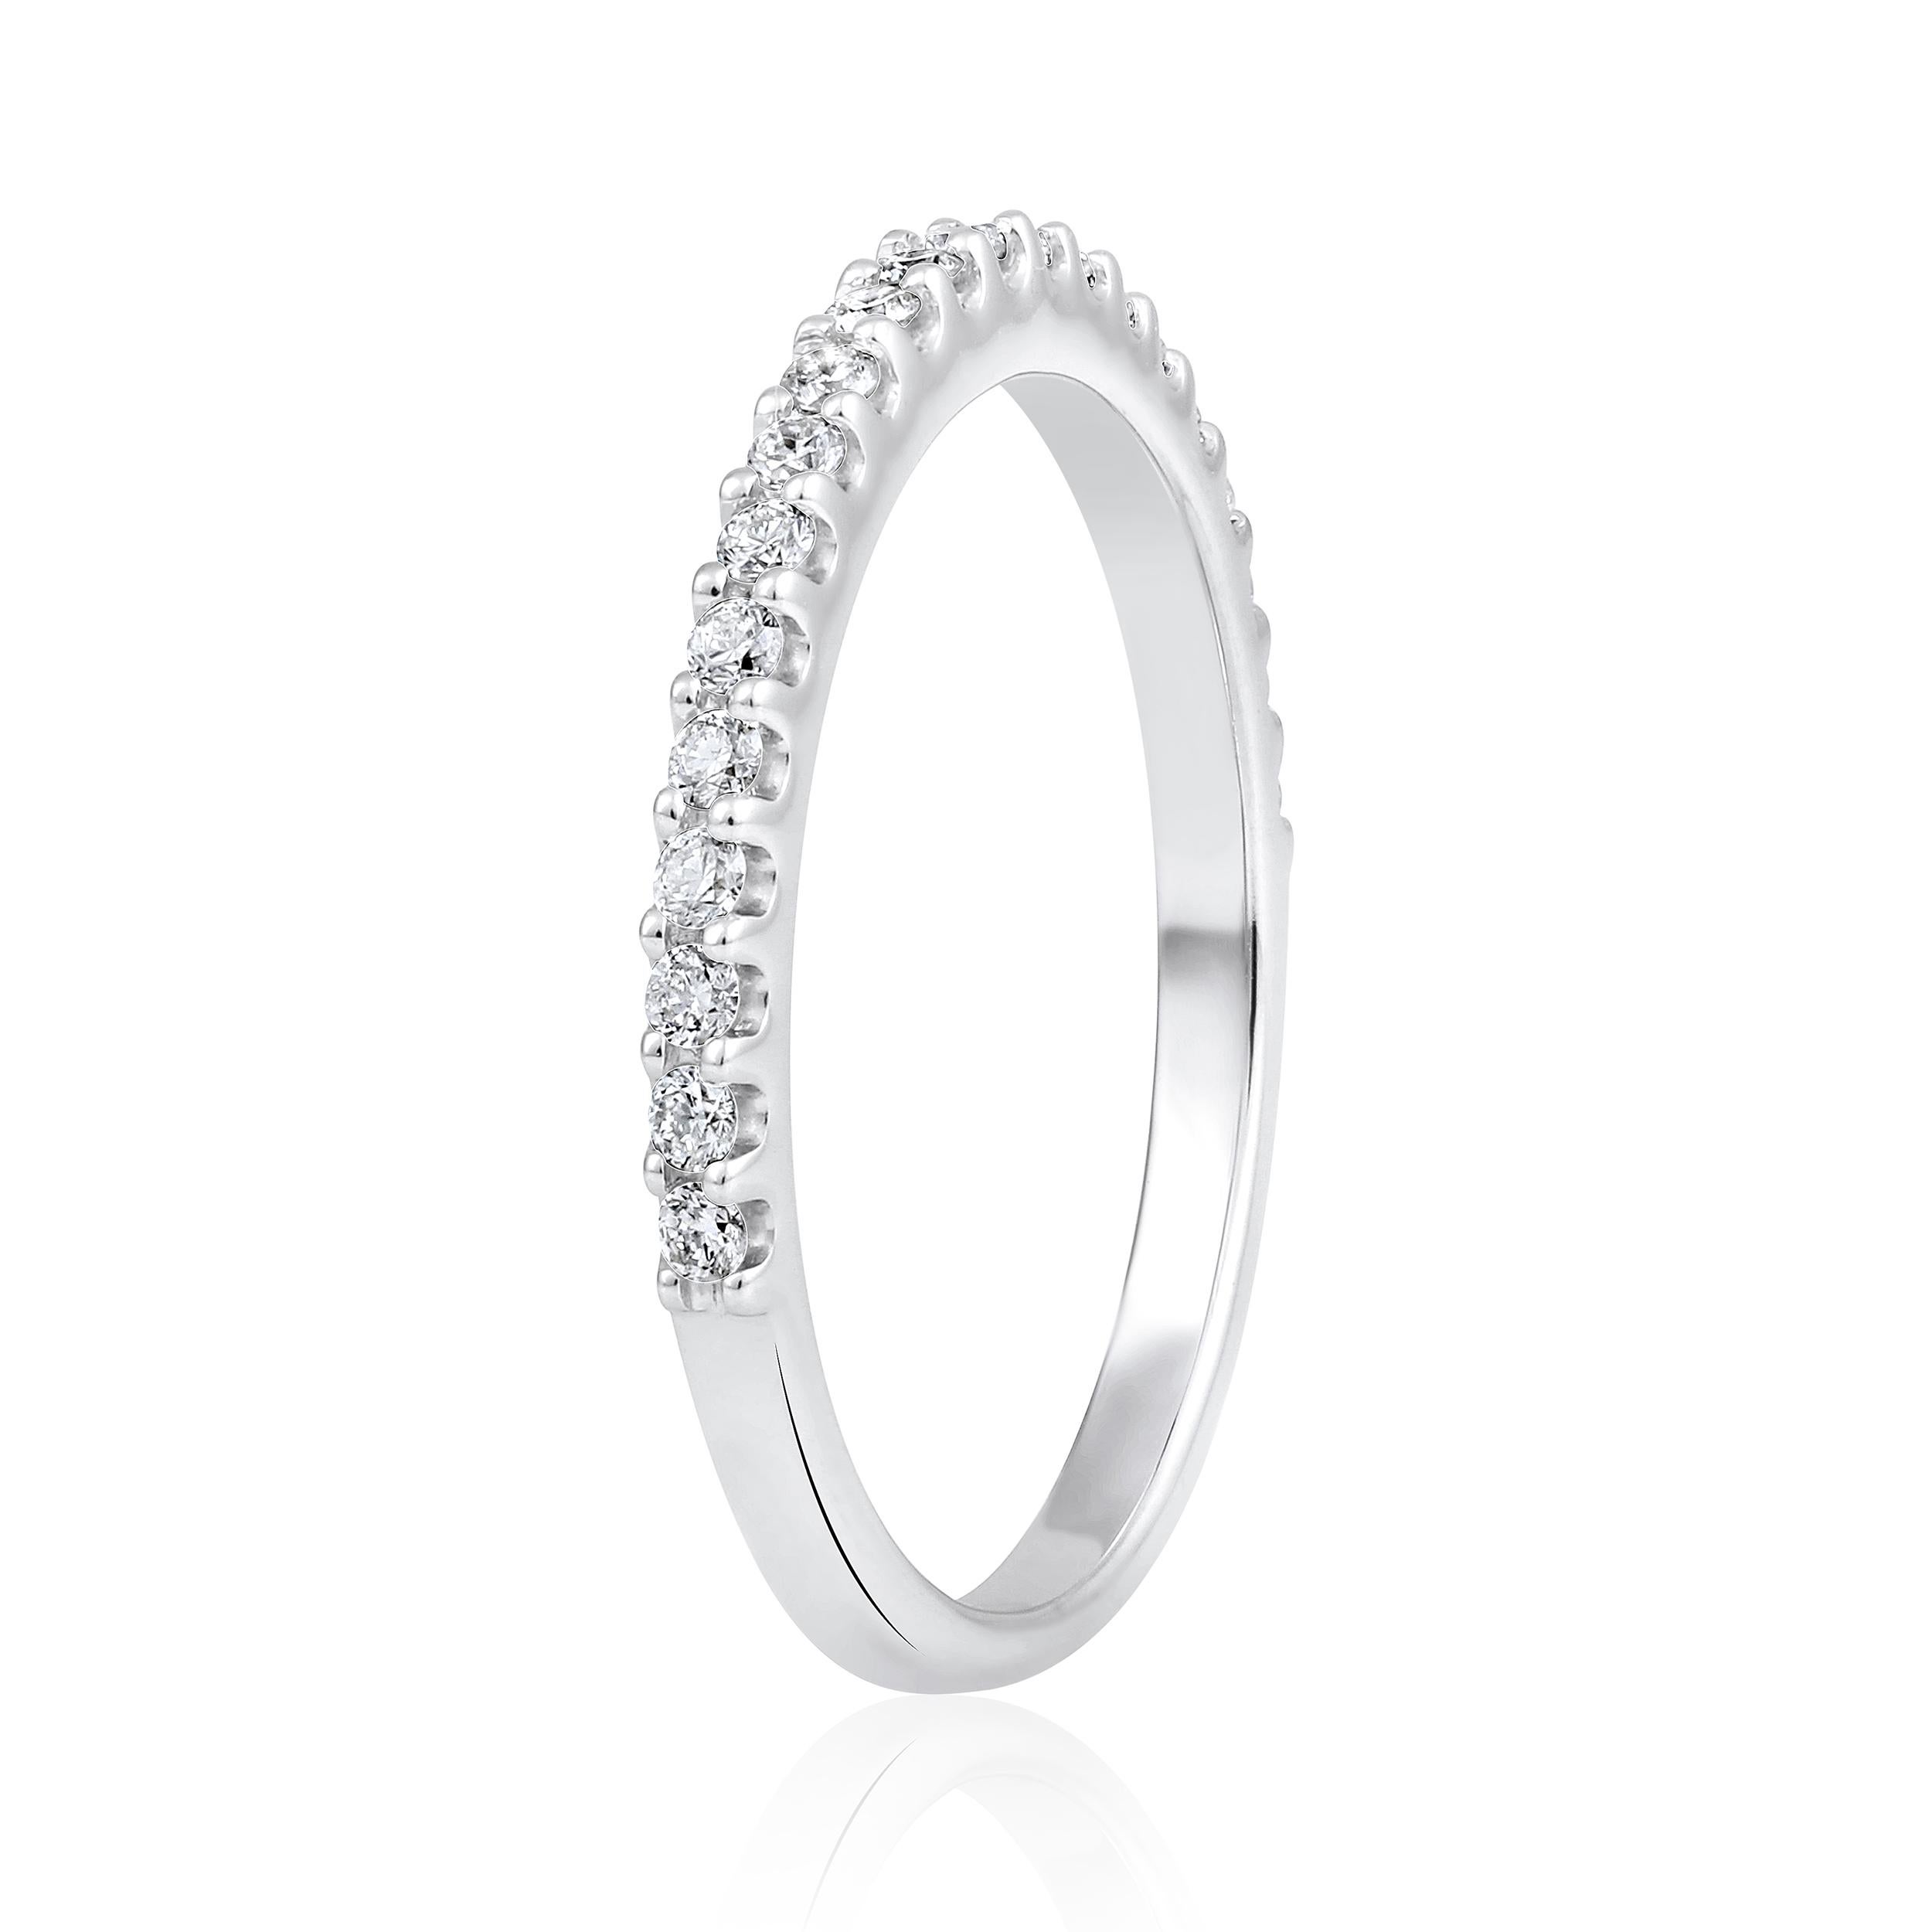 Ring Size: US 7 

Crafted in 1.74 grams of 14K White Gold, the ring contains 21 stones of Round Diamonds with a total of 0.26 carat in G-H color and SI clarity.

CONTEMPORARY AND TIMELESS ESSENCE: Crafted in 14-karat/18-karat with 100% natural